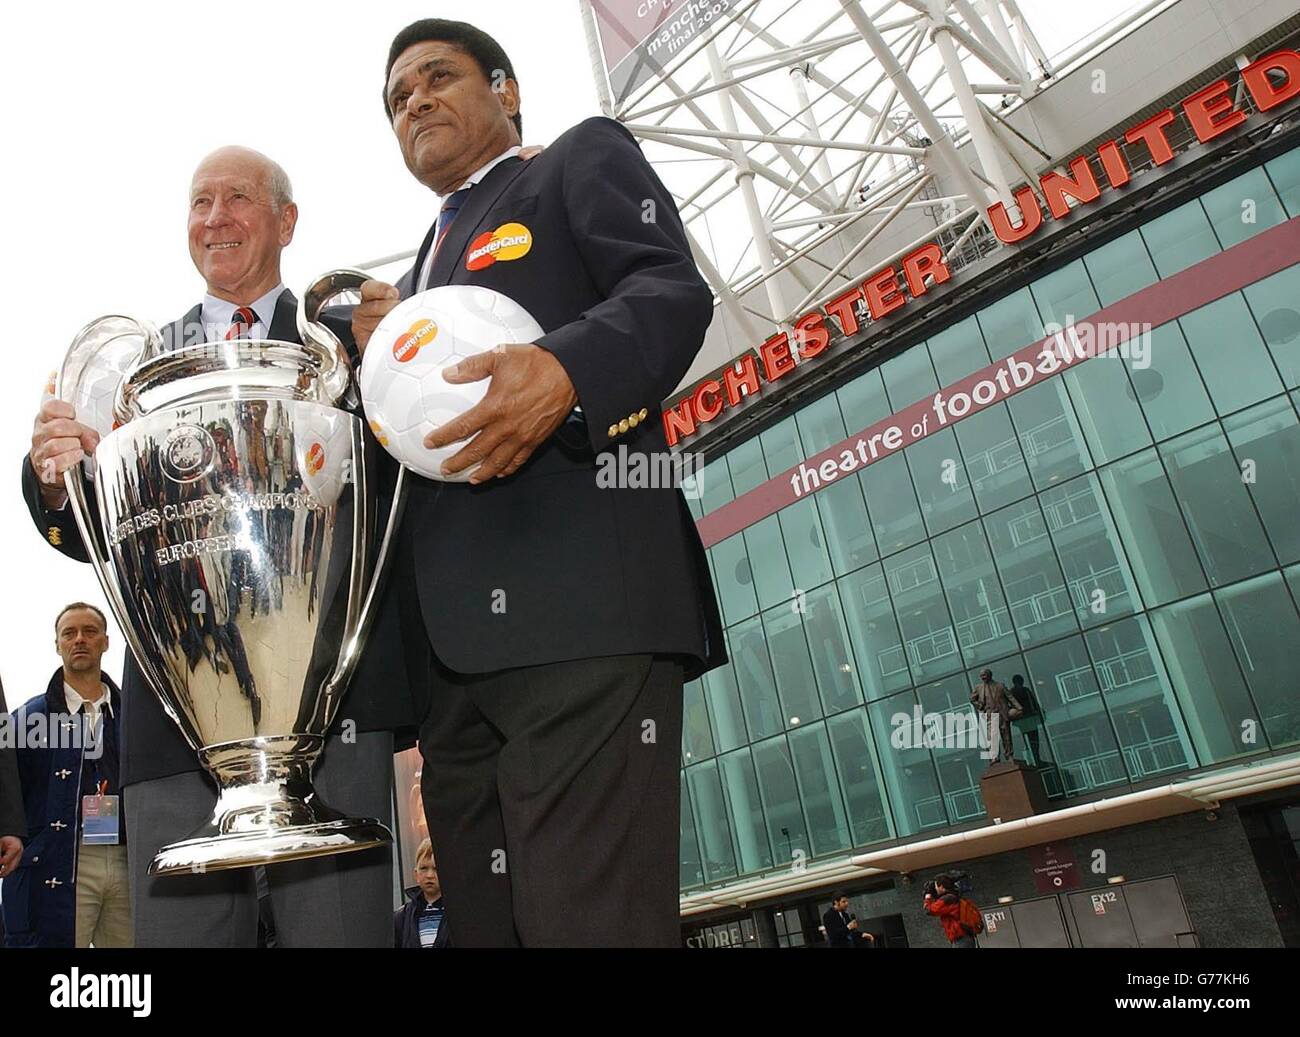 Old Trafford - Champions League Final 2003 Stock Photo - Alamy